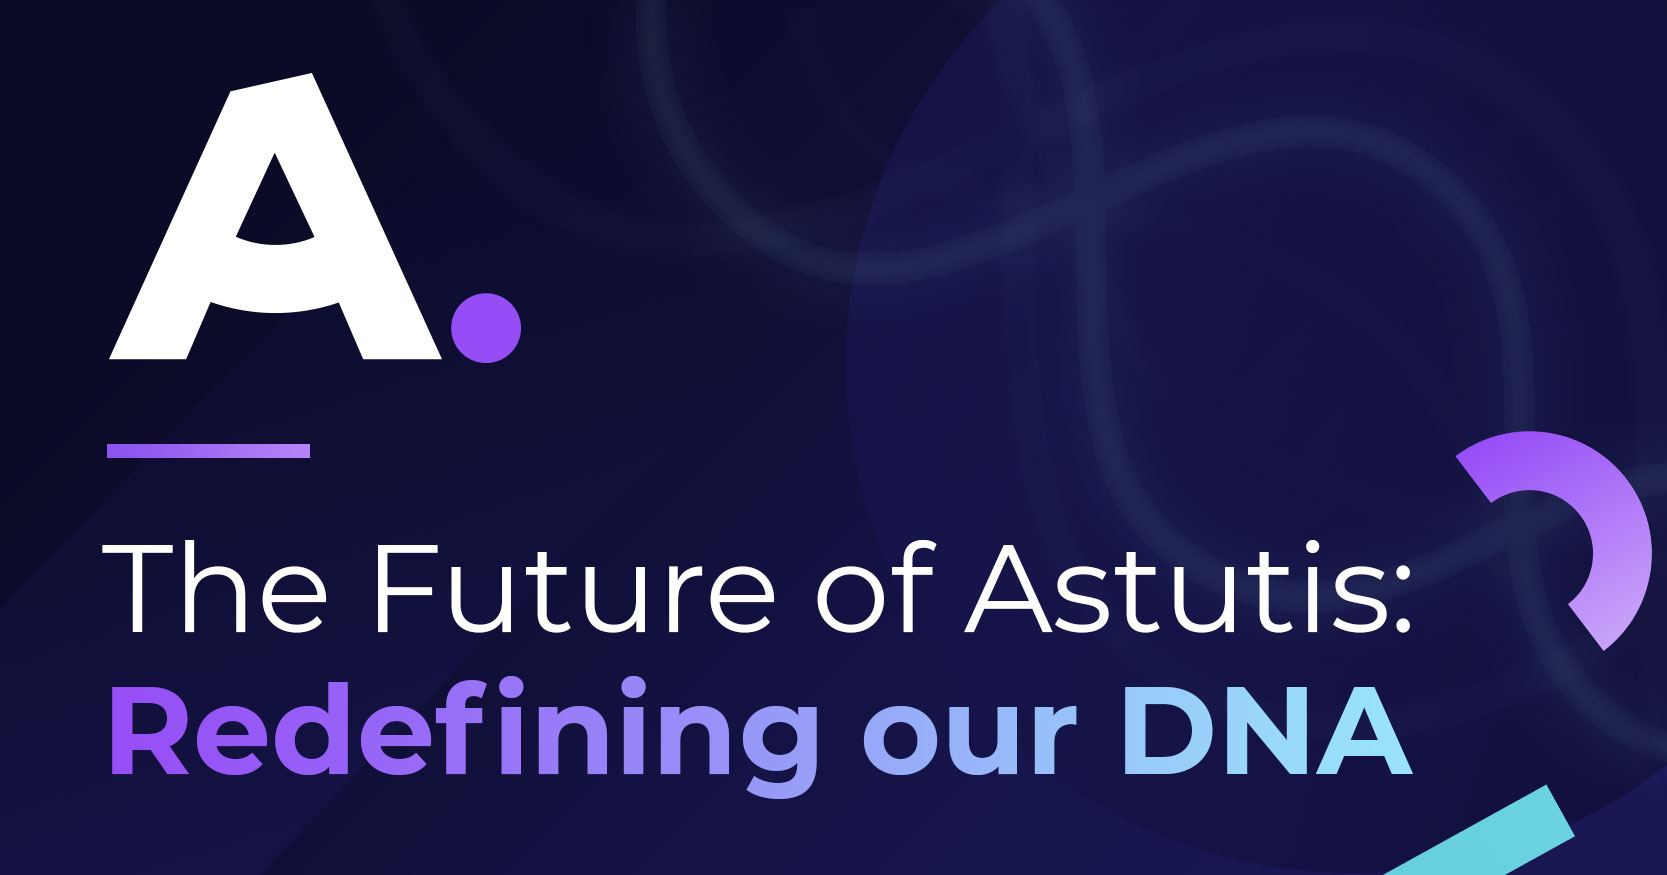 The Future of Astutis: Redefining our DNA Image